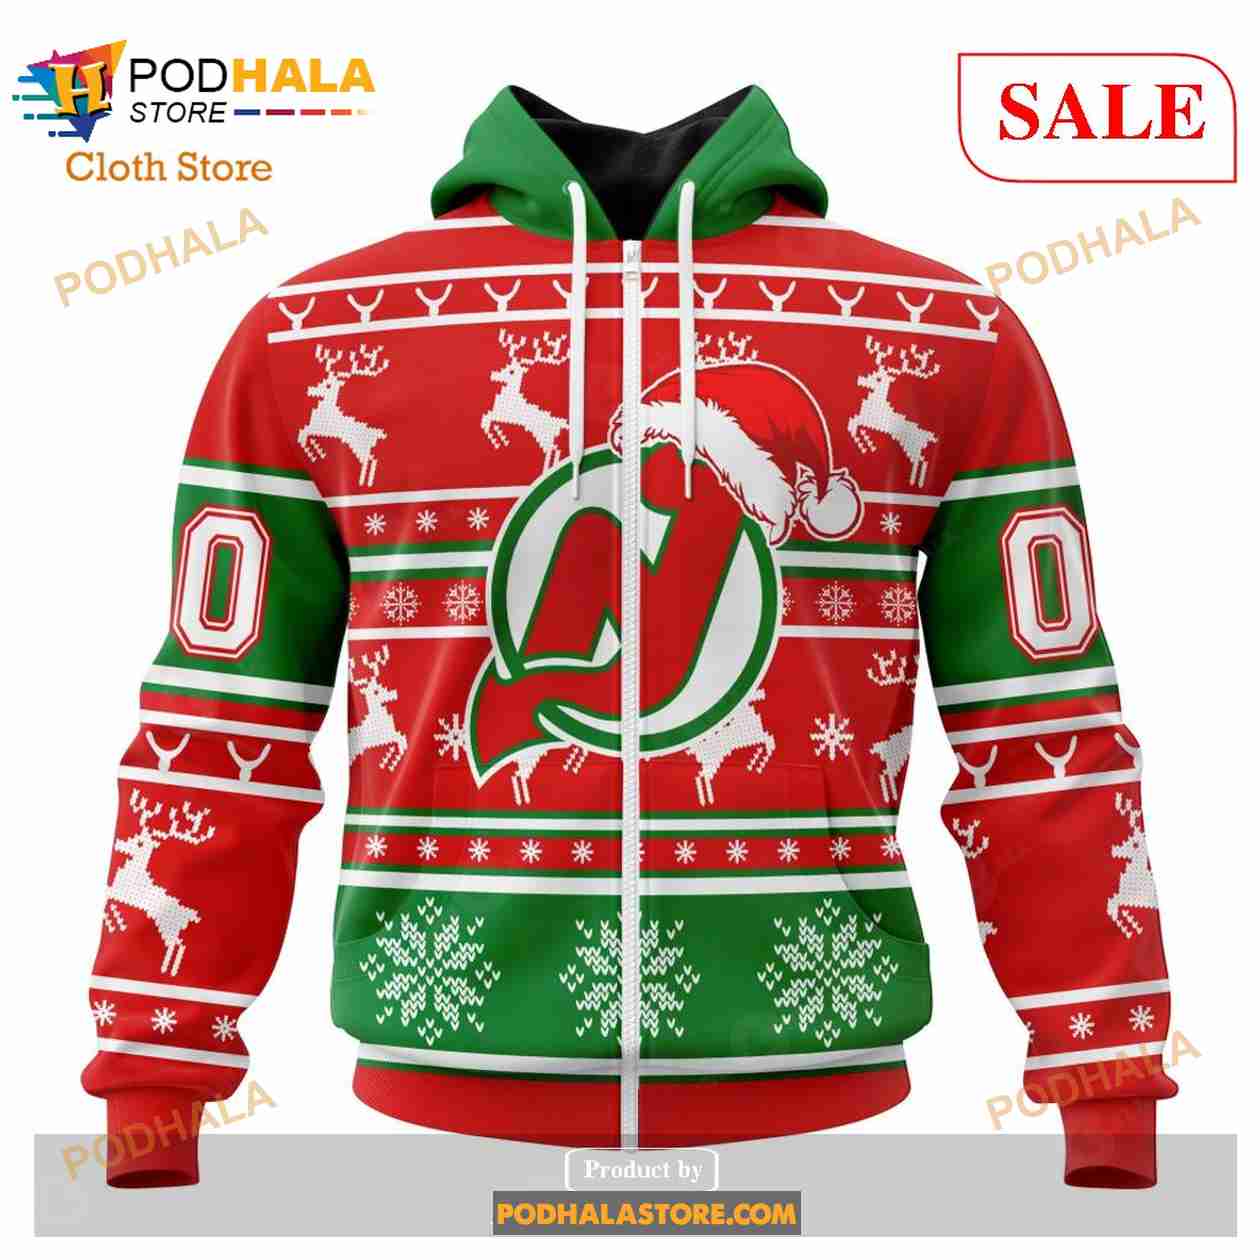 New Jersey Devils Big Logo Ugly Sweater - Red